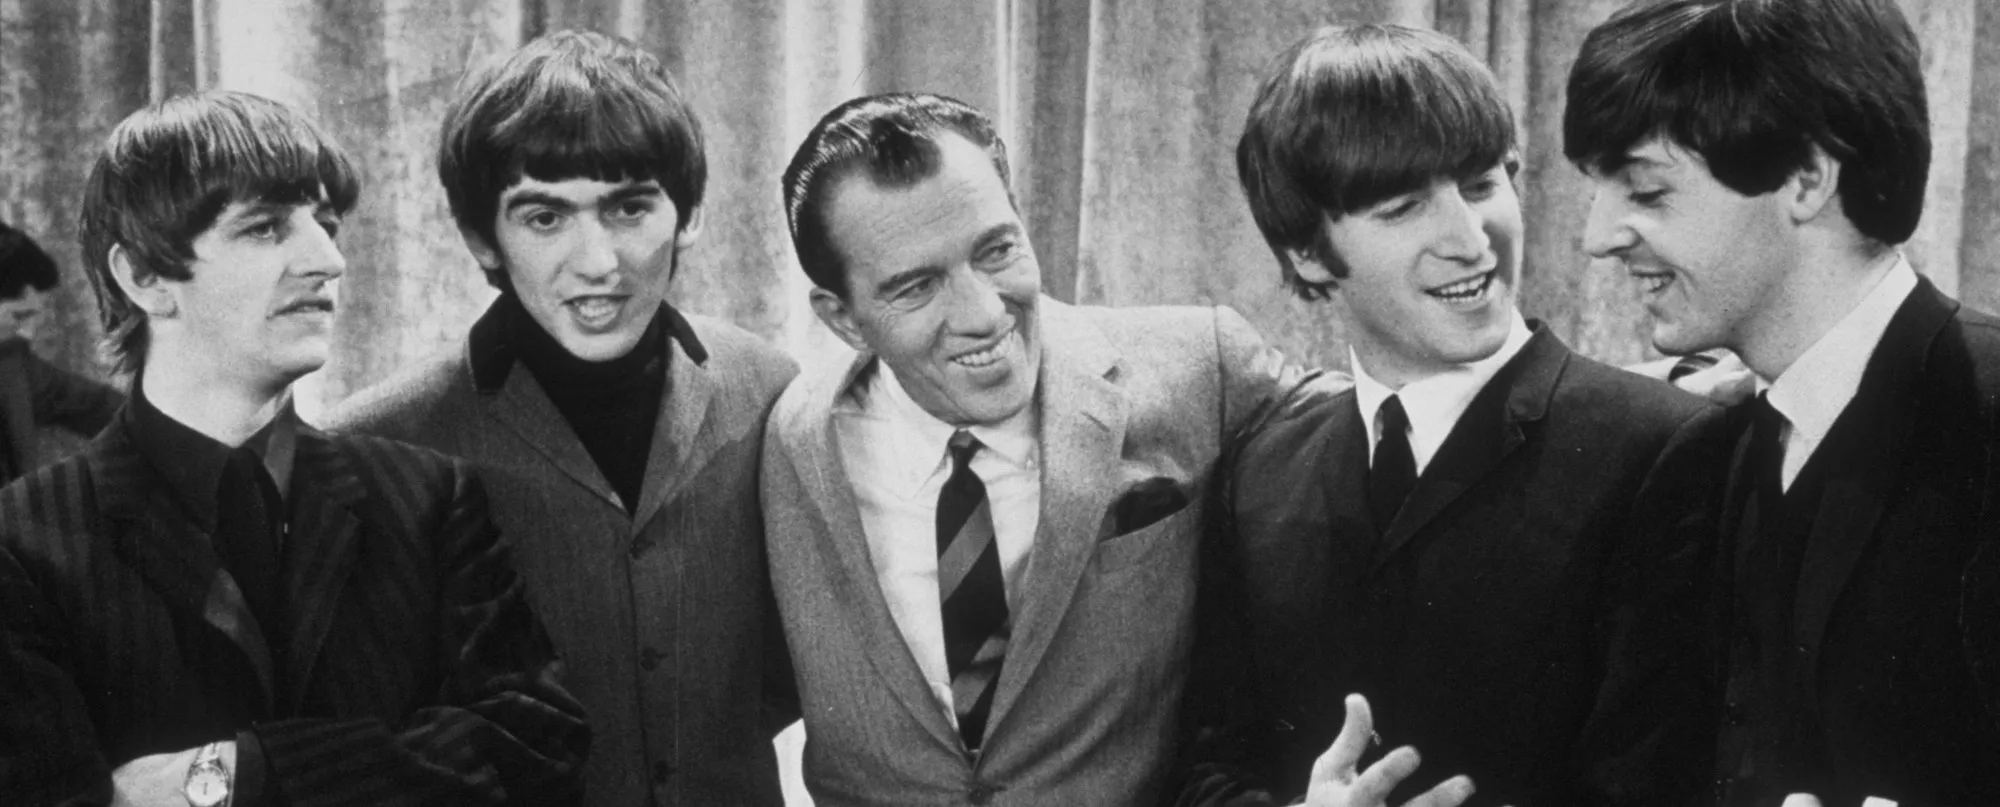 They Changed Music: 5 Iconic Classic Rock Performances from The Ed Sullivan Show